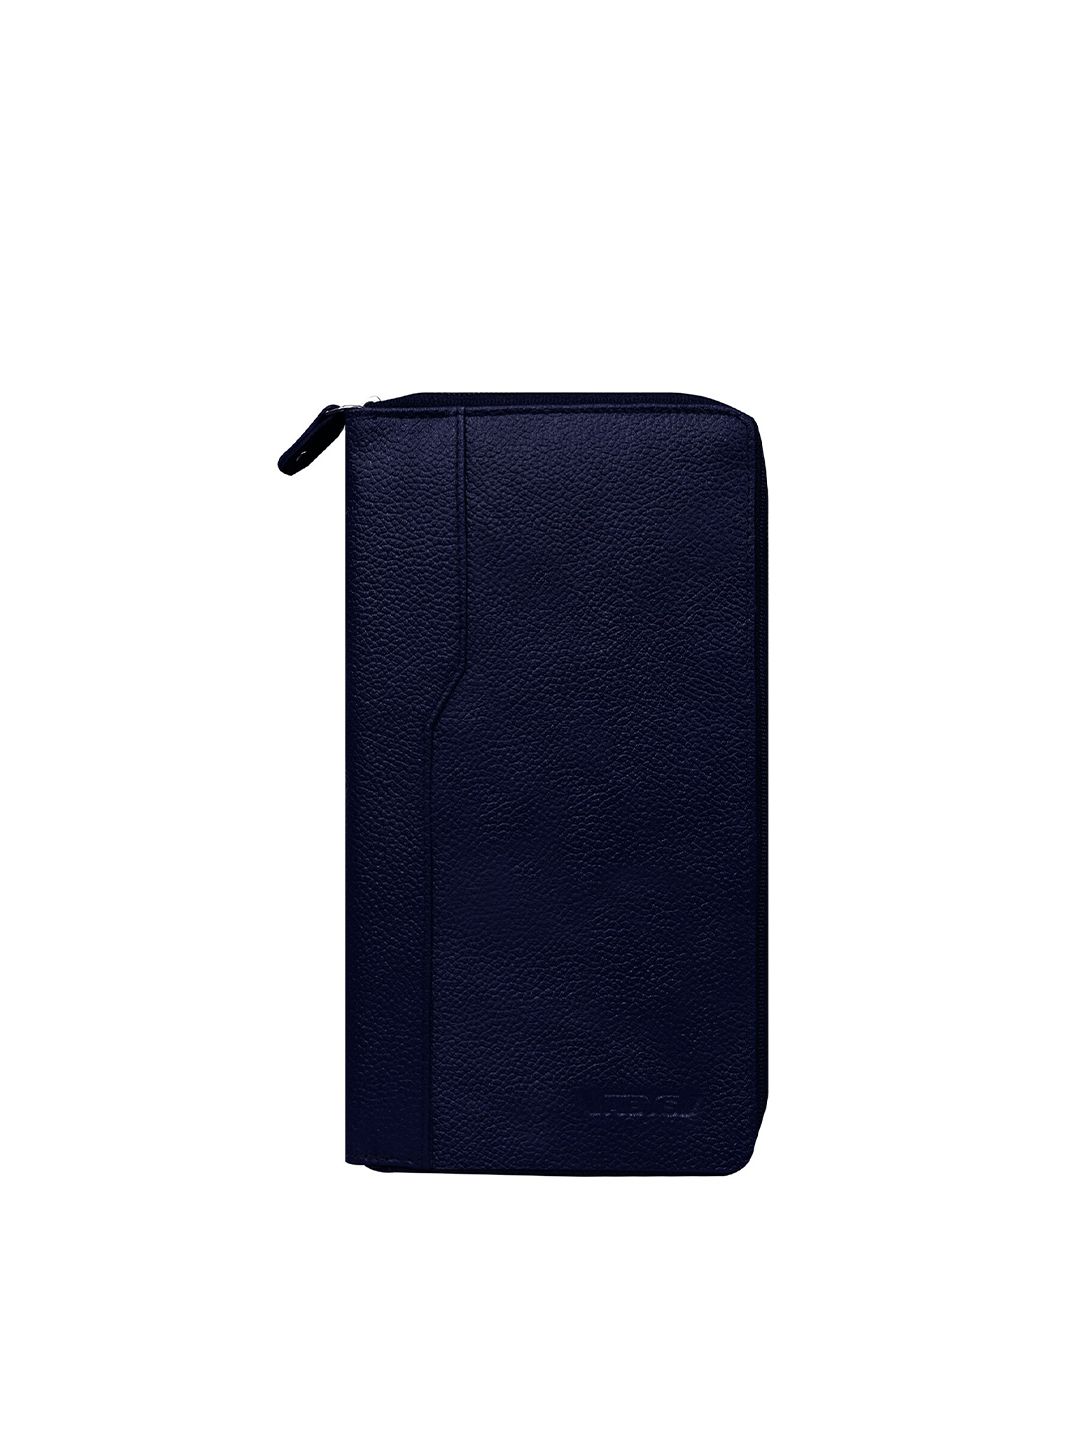 ABYS Unisex Navy Blue Textured 100% Genuine Leather Long Wallet with Passport Holder Price in India